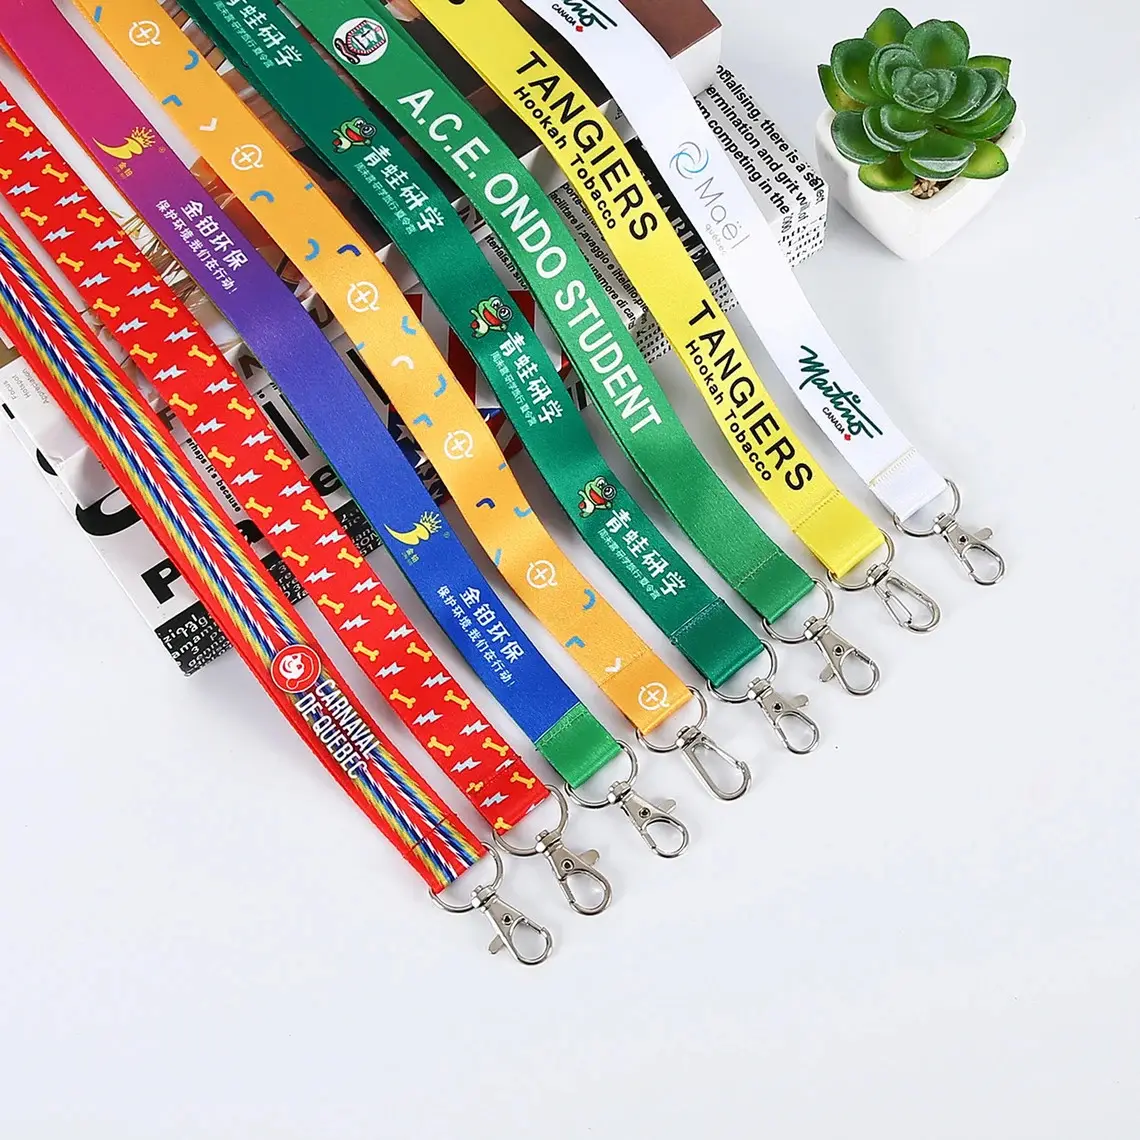 Full Color Personalized Lanyards with your name company, school logo, business, Keys & id holder